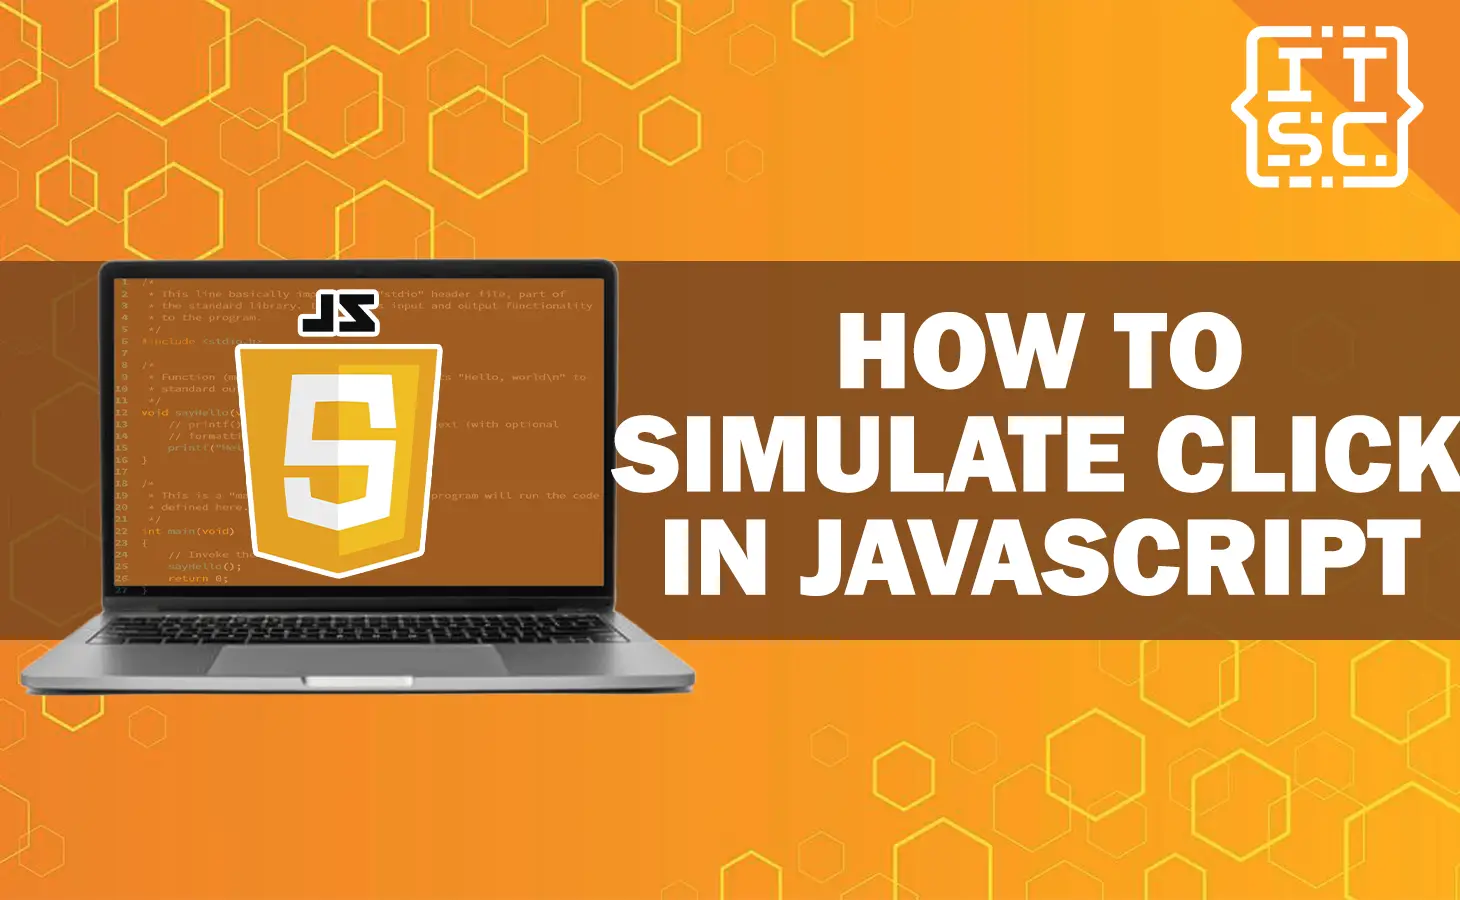 How to simulate click in JavaScript